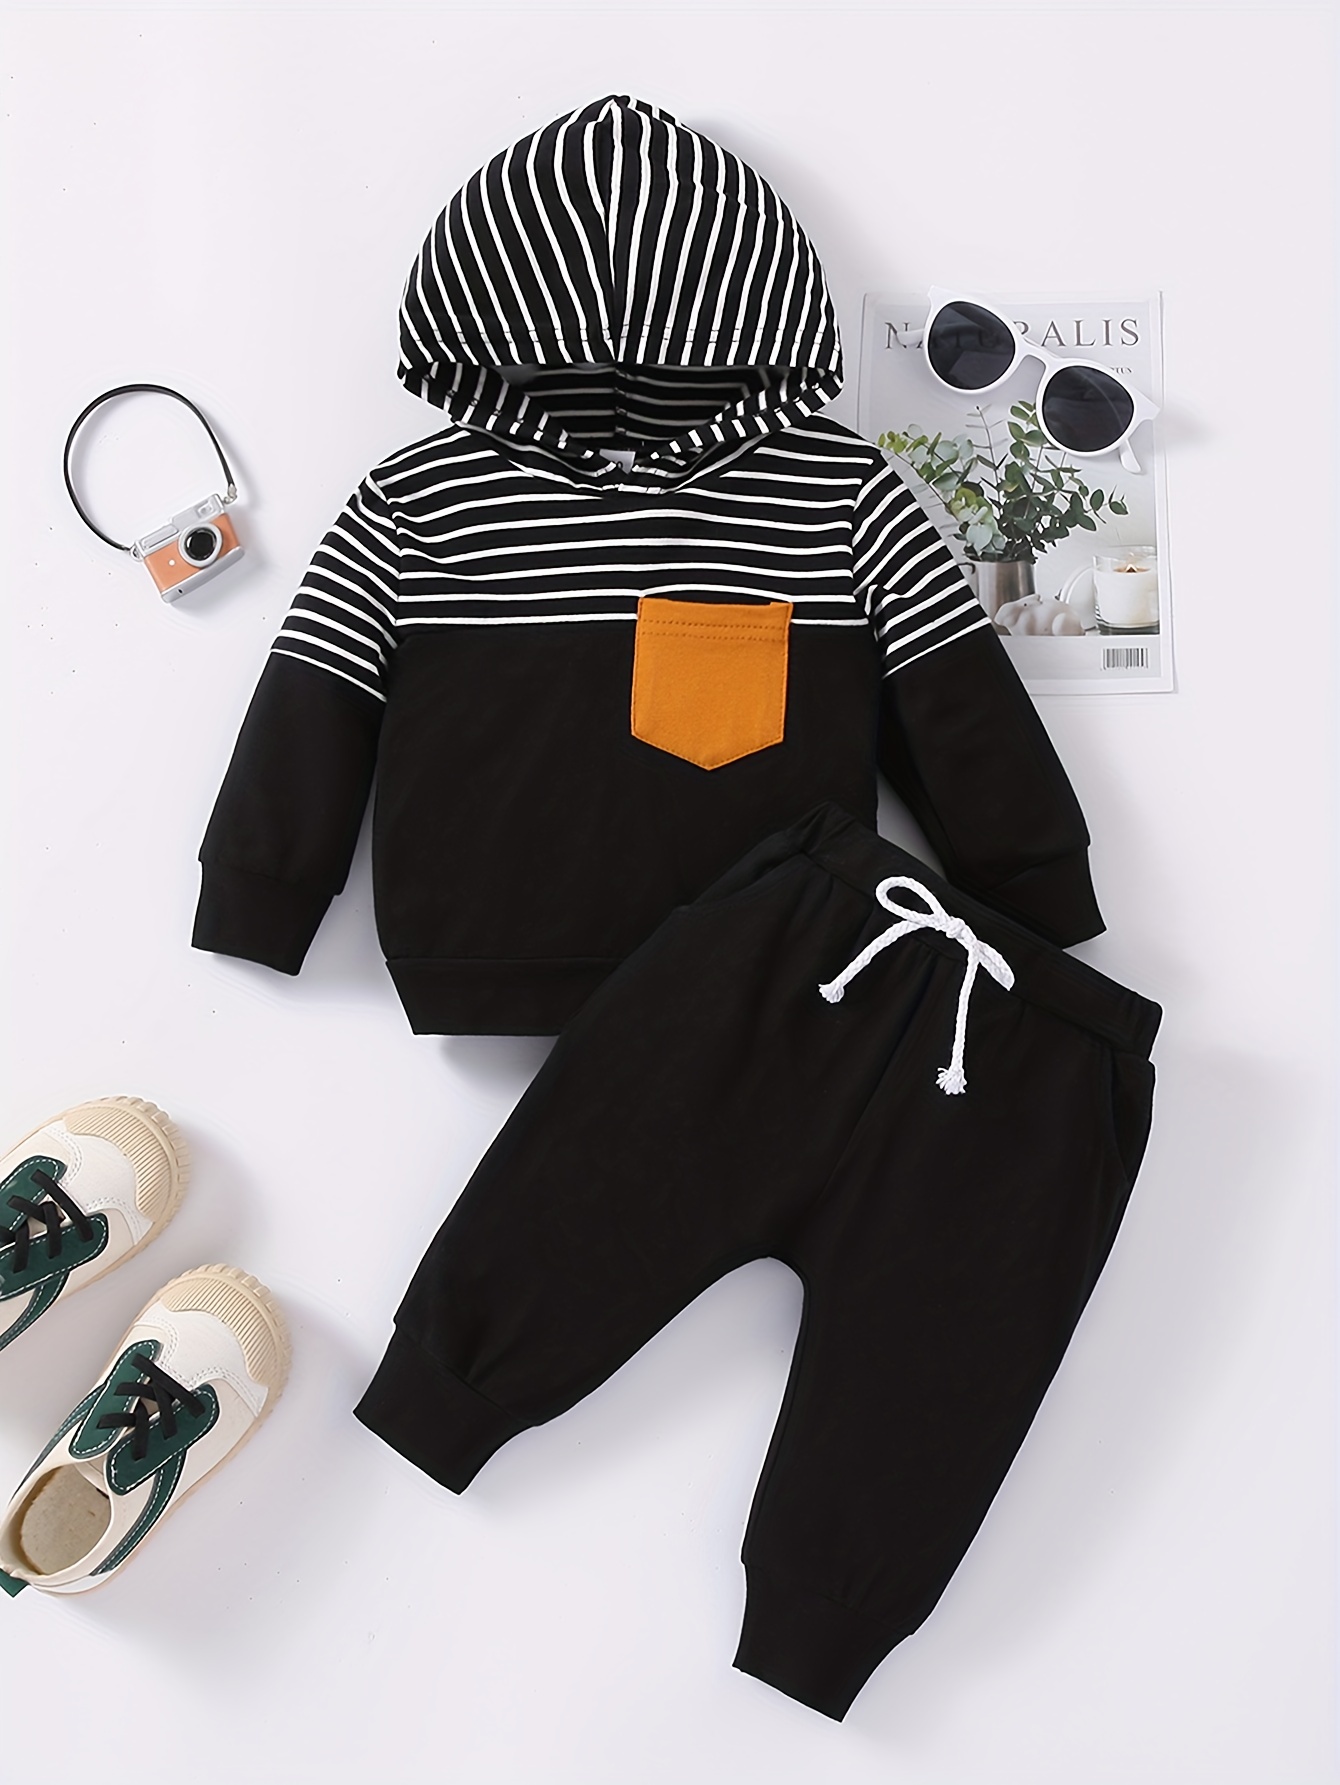 Stripe Paneled Hoodie With Pocket, Hoodies For Baby Boys, Casual Sweatshirt  Set, Long Sleeves Pullover Sweatshirt Top Trousers 2pcs Outfit